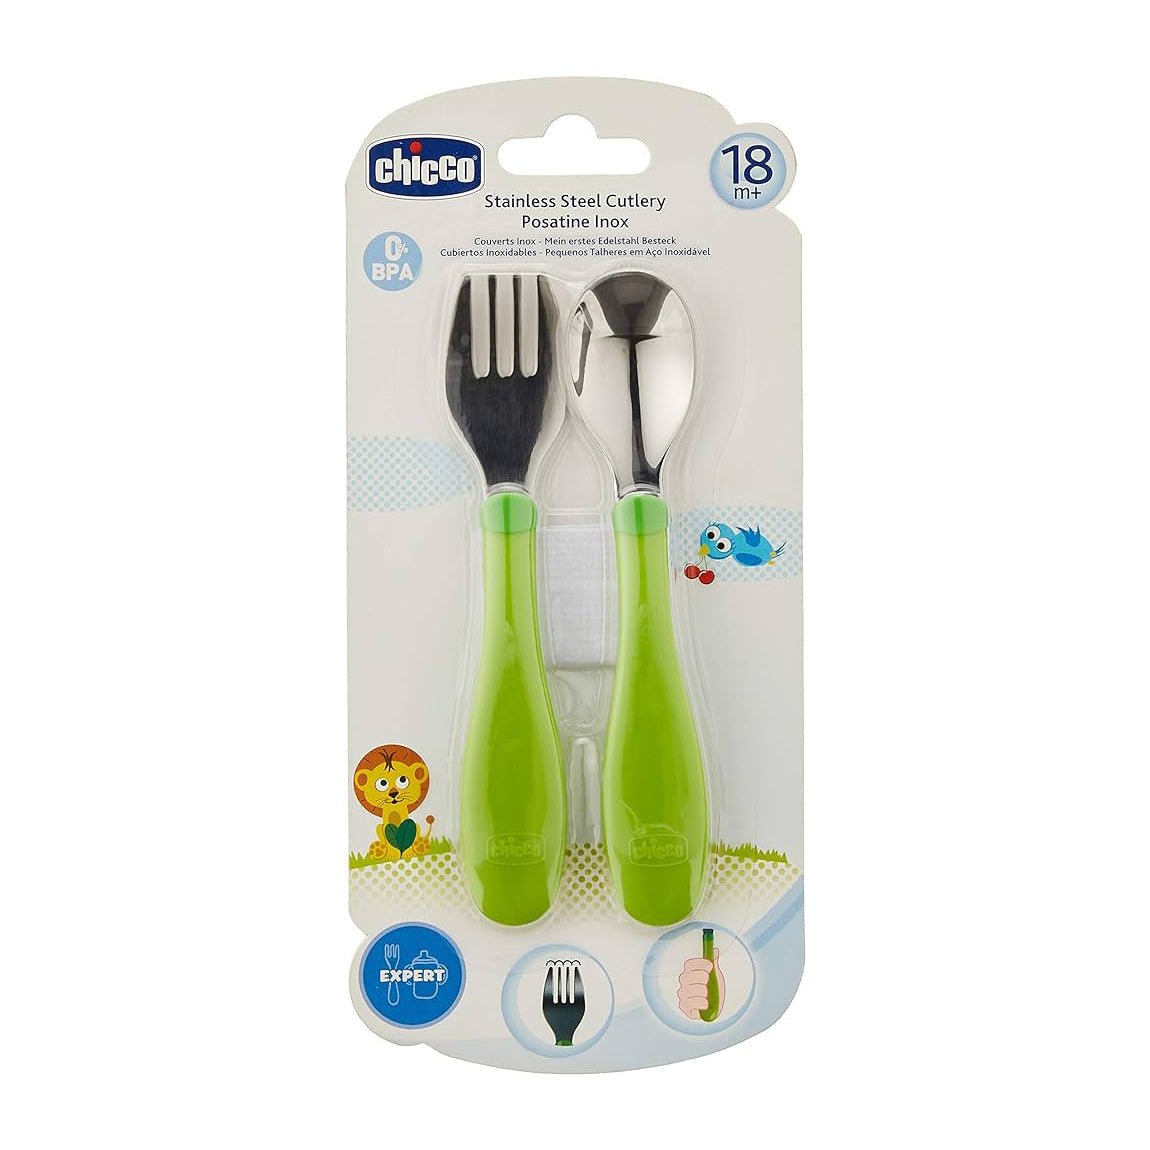 Chicco Stainless Steel Cutlery 18+m - Green - Bloom Pharmacy